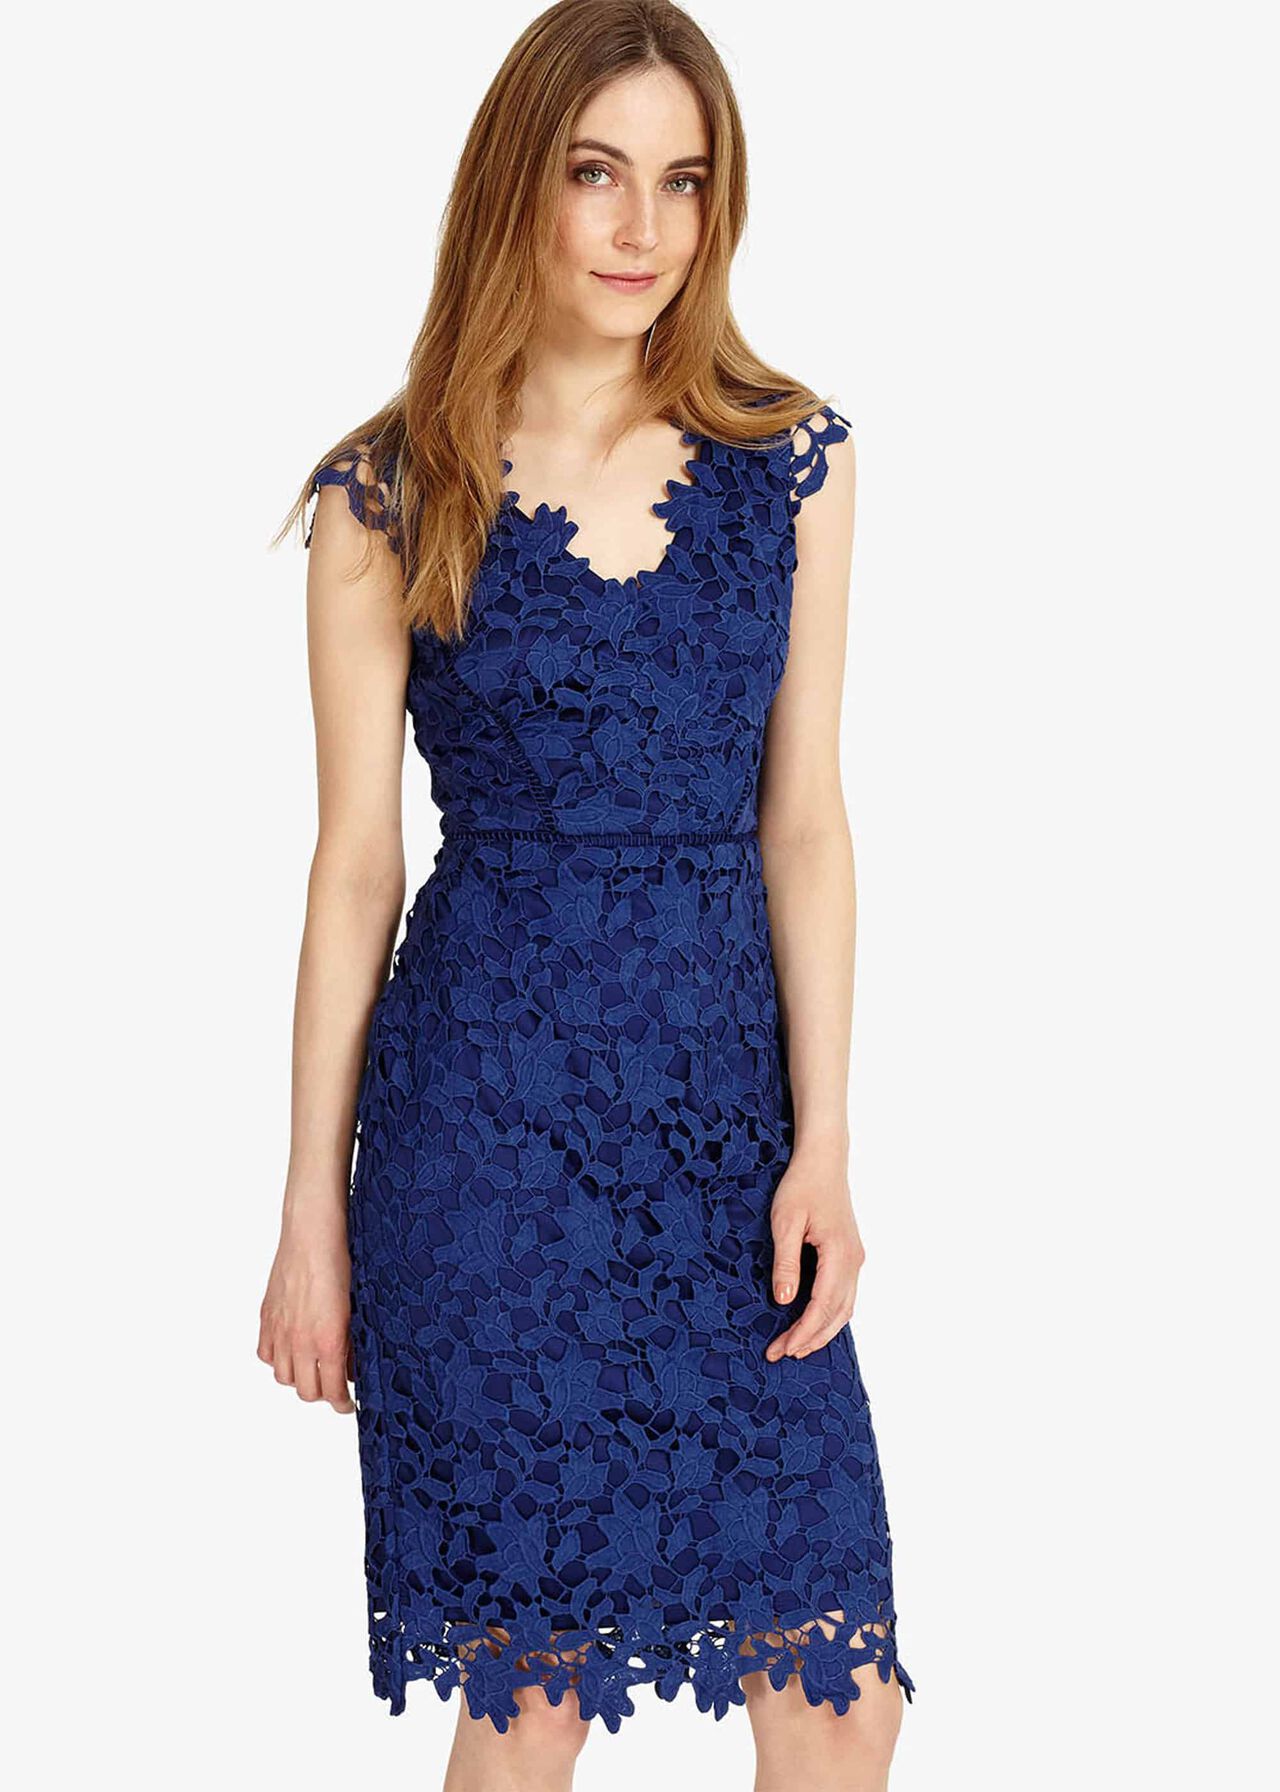 Petals Lace Dress | Phase Eight